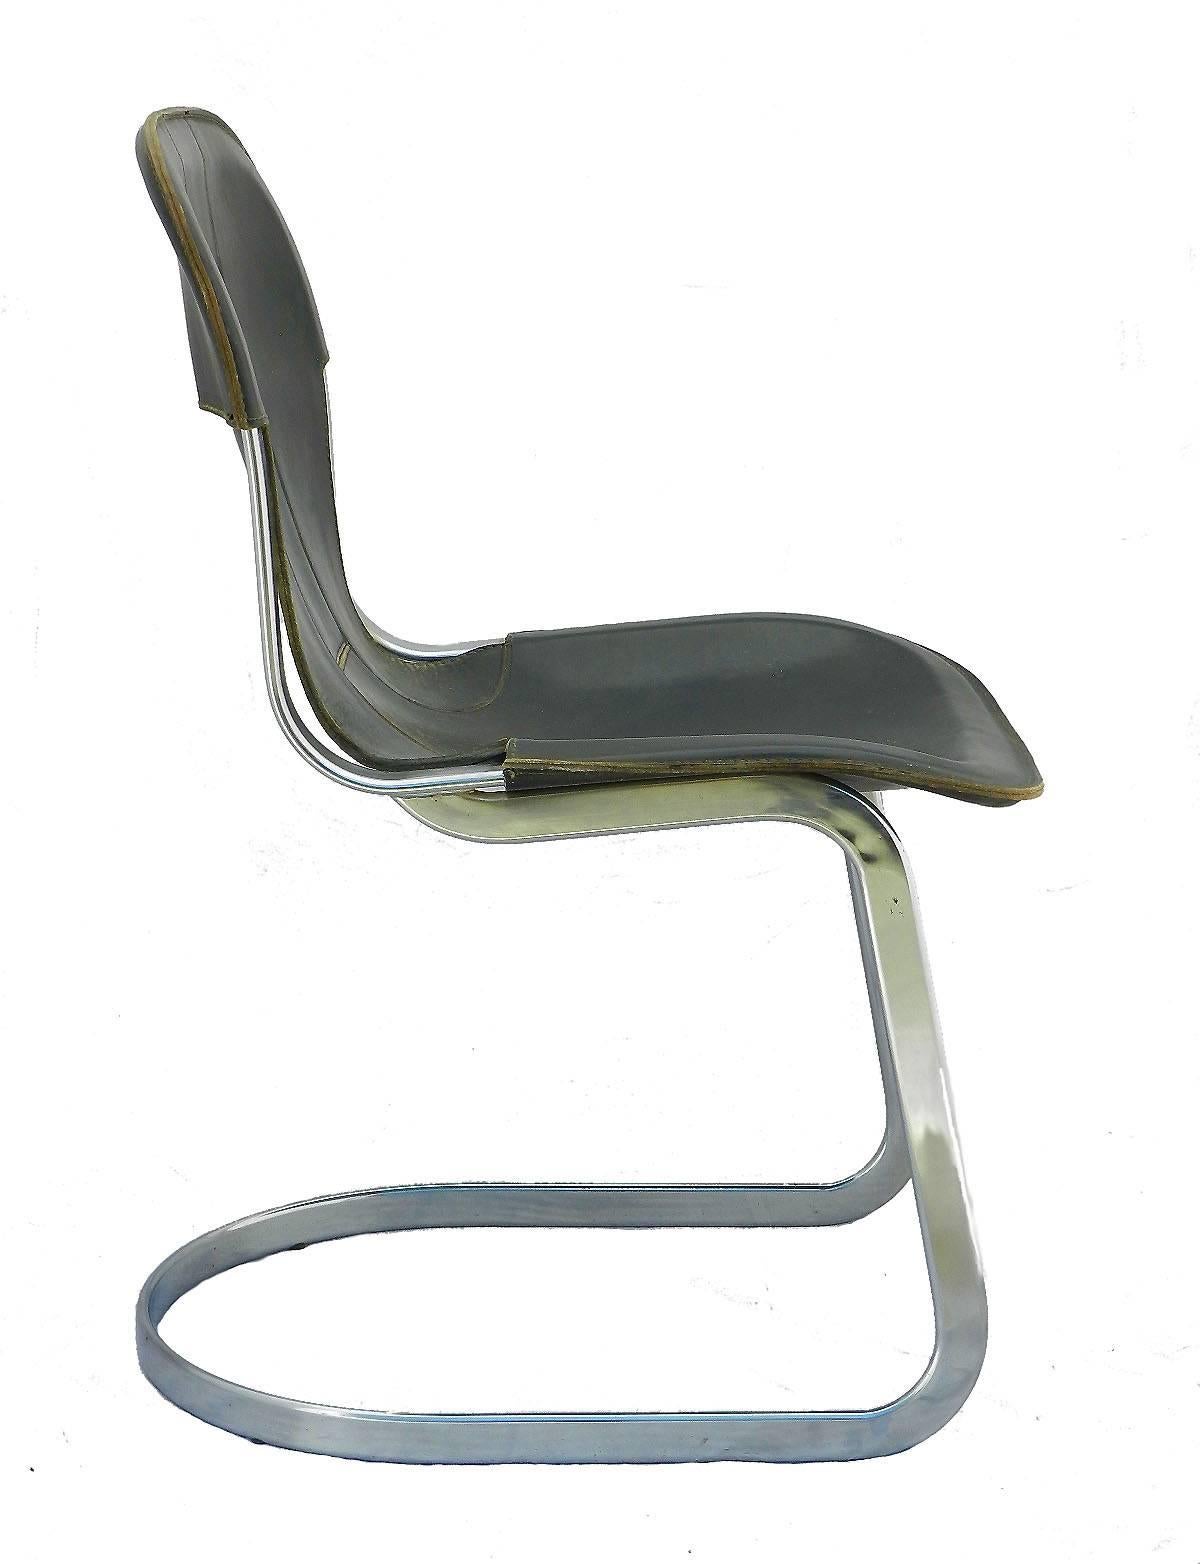 Six Willy Rizzo dining chairs for Cidue Italy chrome leather.
Willy Rizzo dining chairs produced by Cidue.
Saddle leather seats with good vintage patina and signs if use with some minor restorations.
Tubular chrome-plated steel frames with some